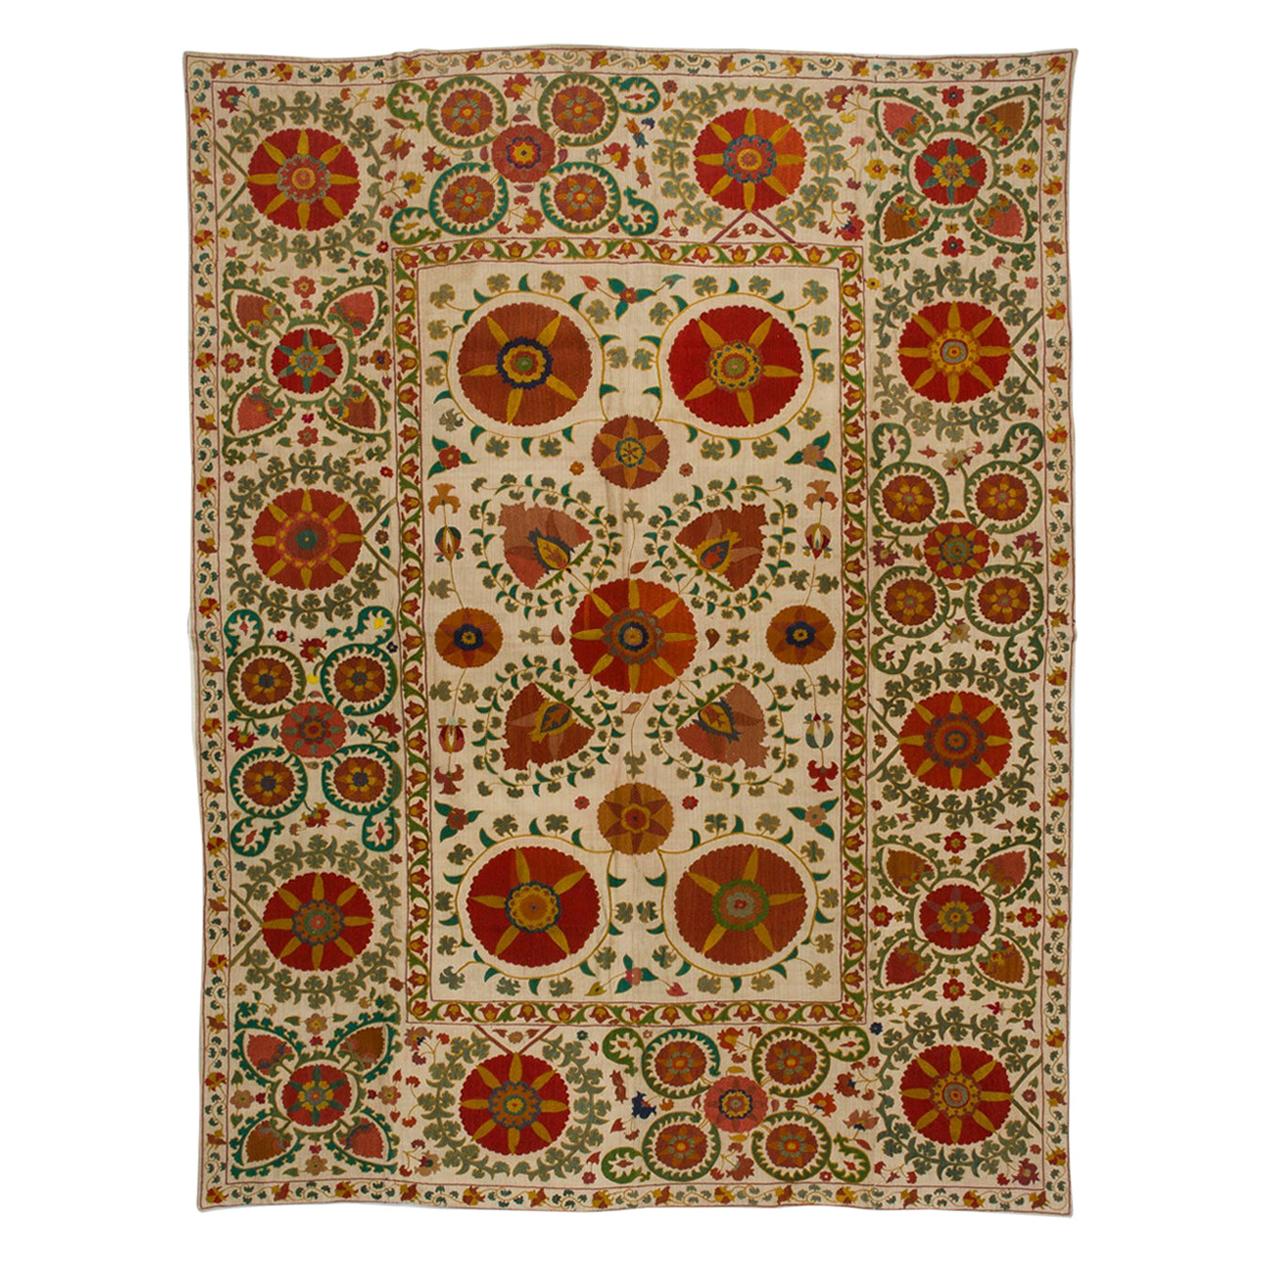 Susani Uzbek Embroidery Tapestry Suitable for Table, curtain, Bed, Wall